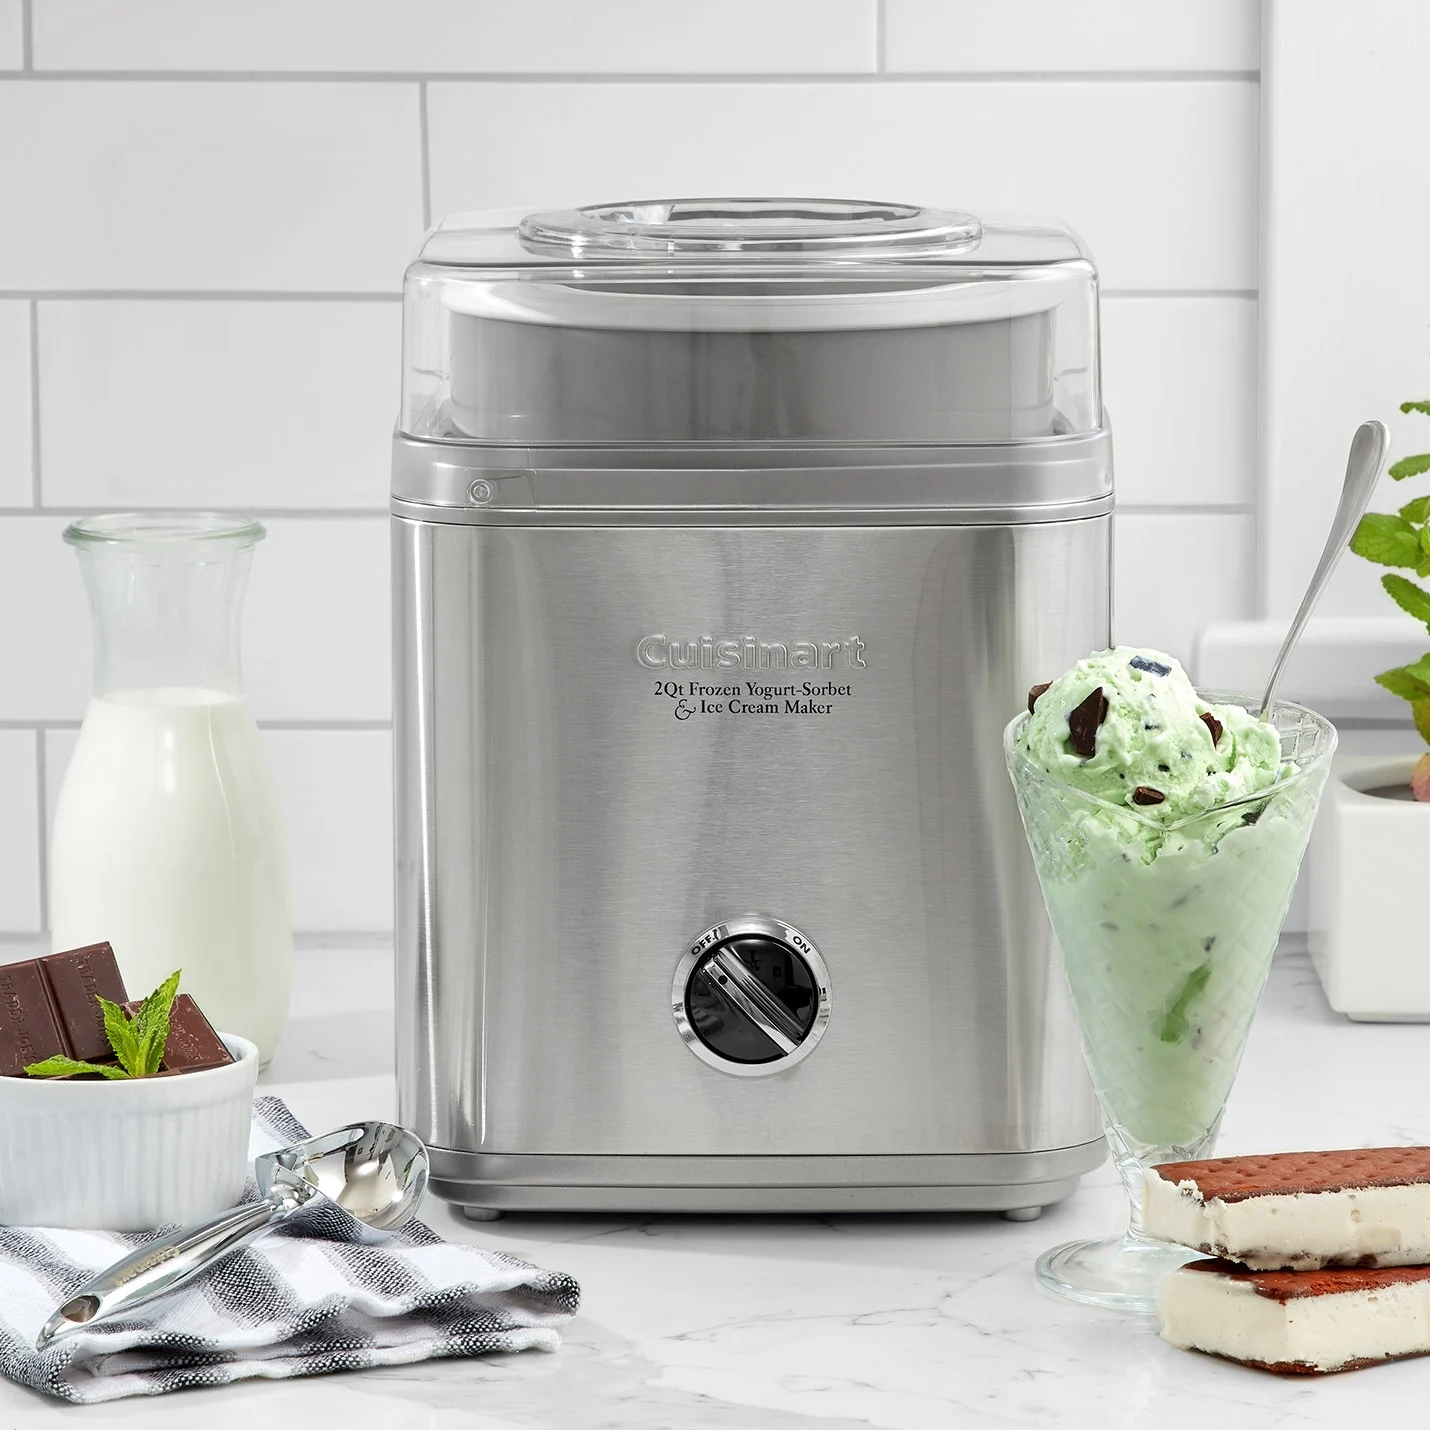 how-to-use-cuisinart-2qt-ice-cream-maker